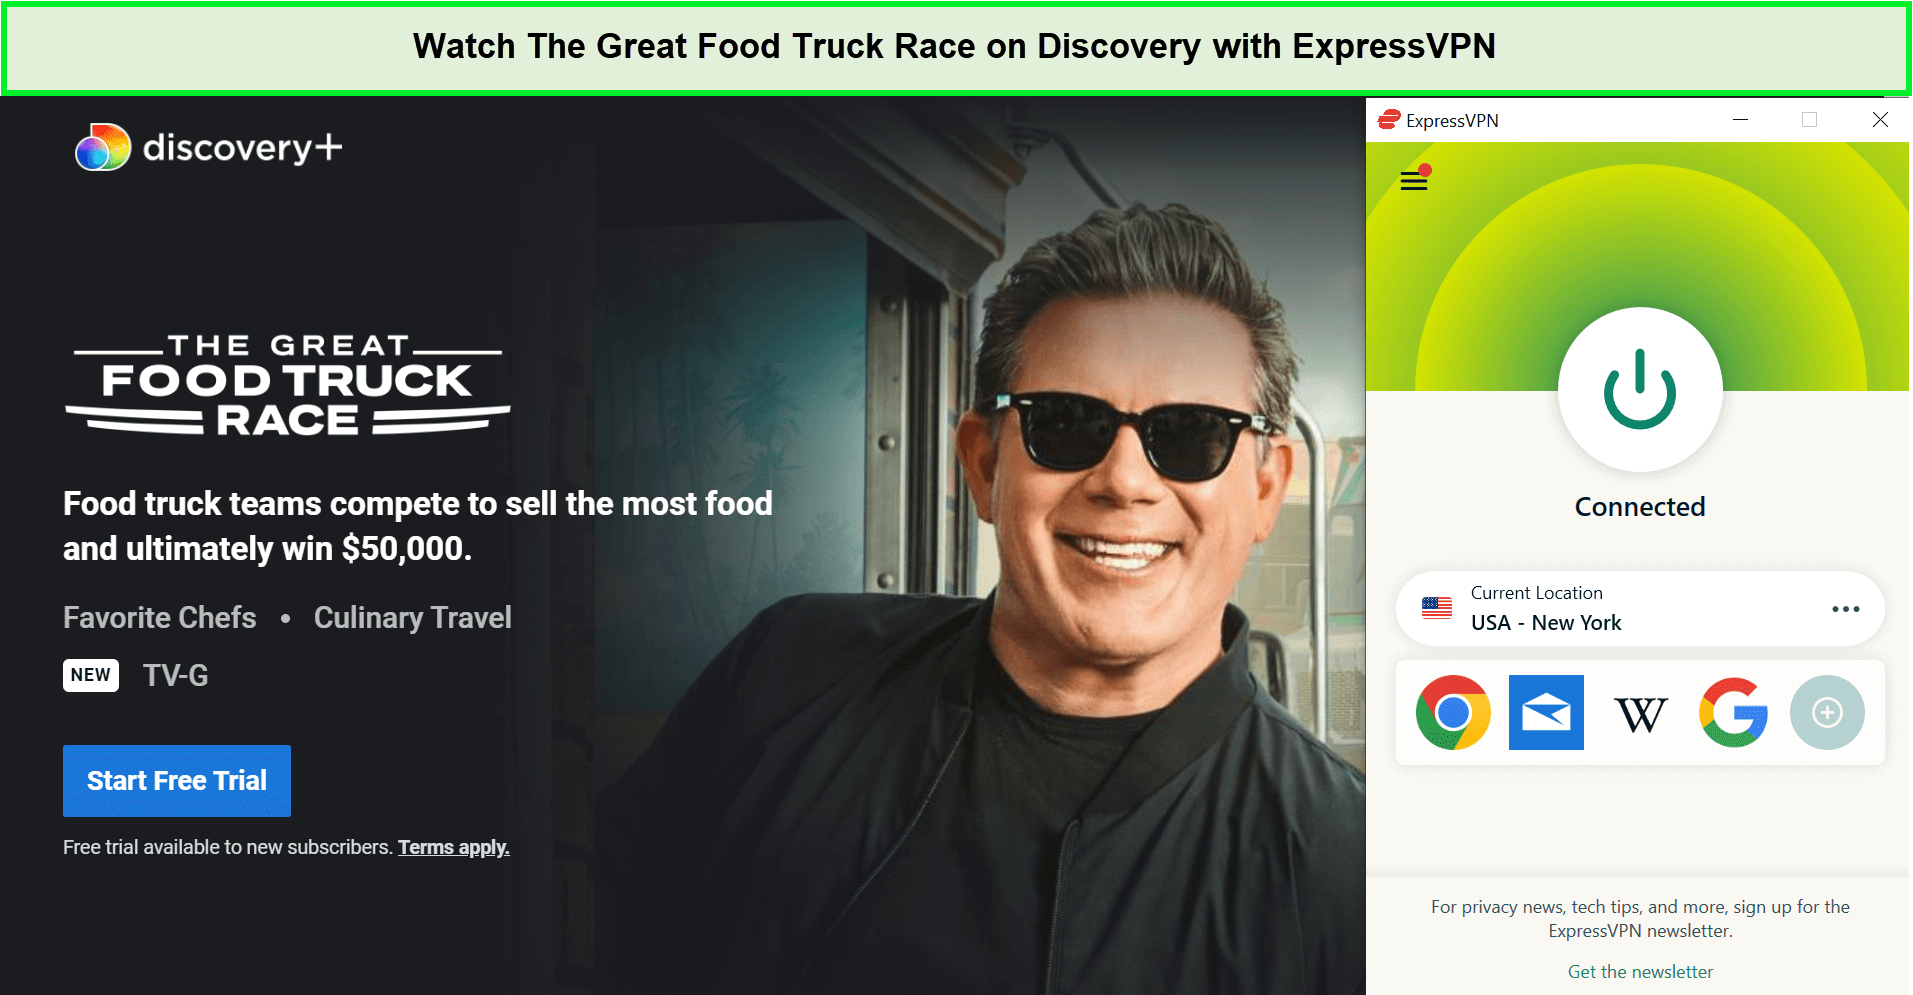 Watch-The-Great-Food-Truck-Race-outside-us-on-Discovery-with-ExpressVPN